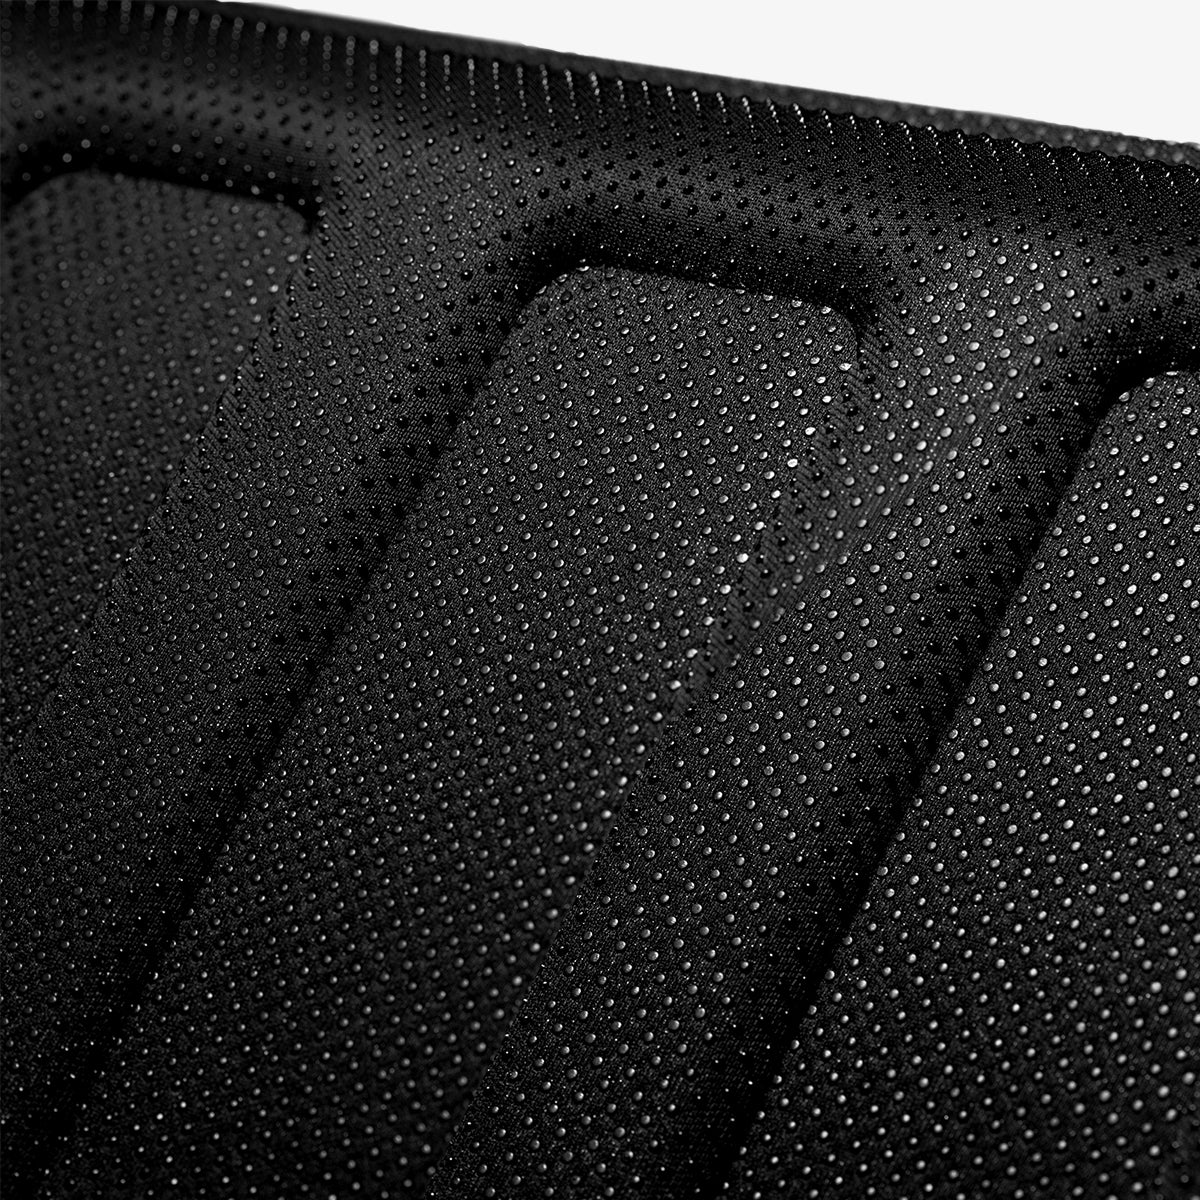 ACP06529 - Tesla Model Y Front Trunk Mat TL10-Y in Black showing the rear focusing on the details